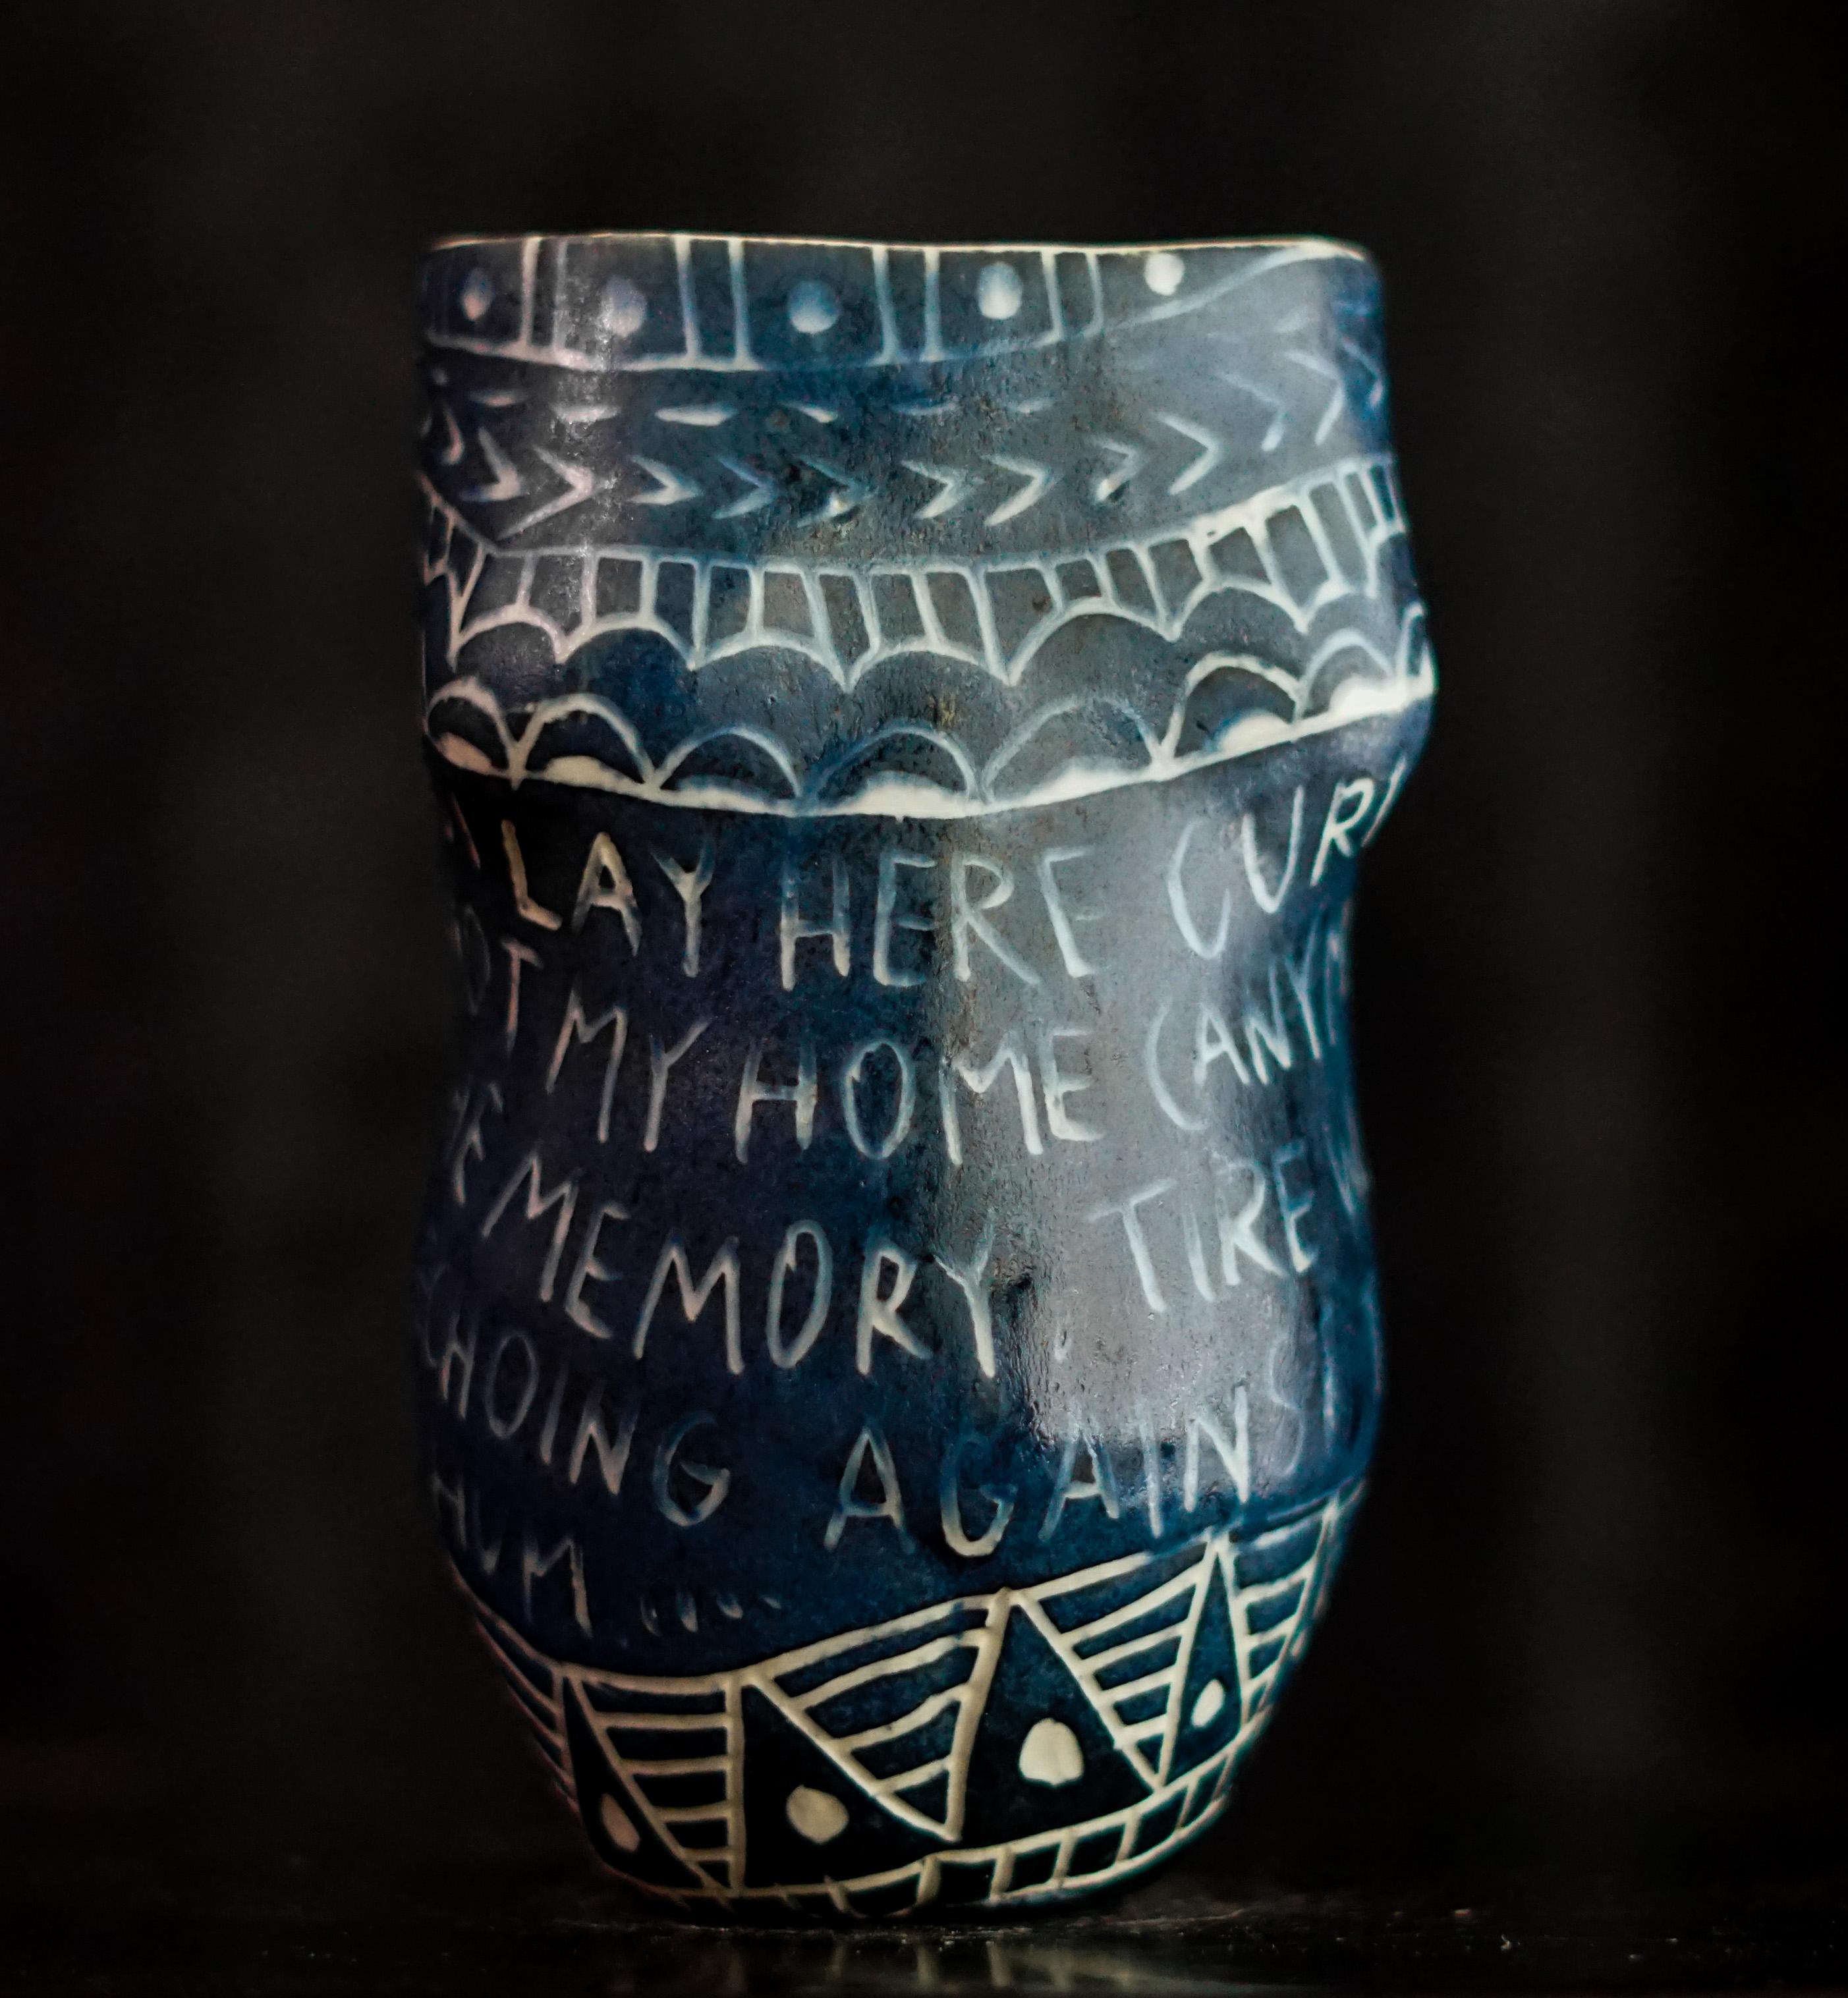 “So I Lay Here...” Porcelain cup with sgraffito detailing - Sculpture by Alex Hodge